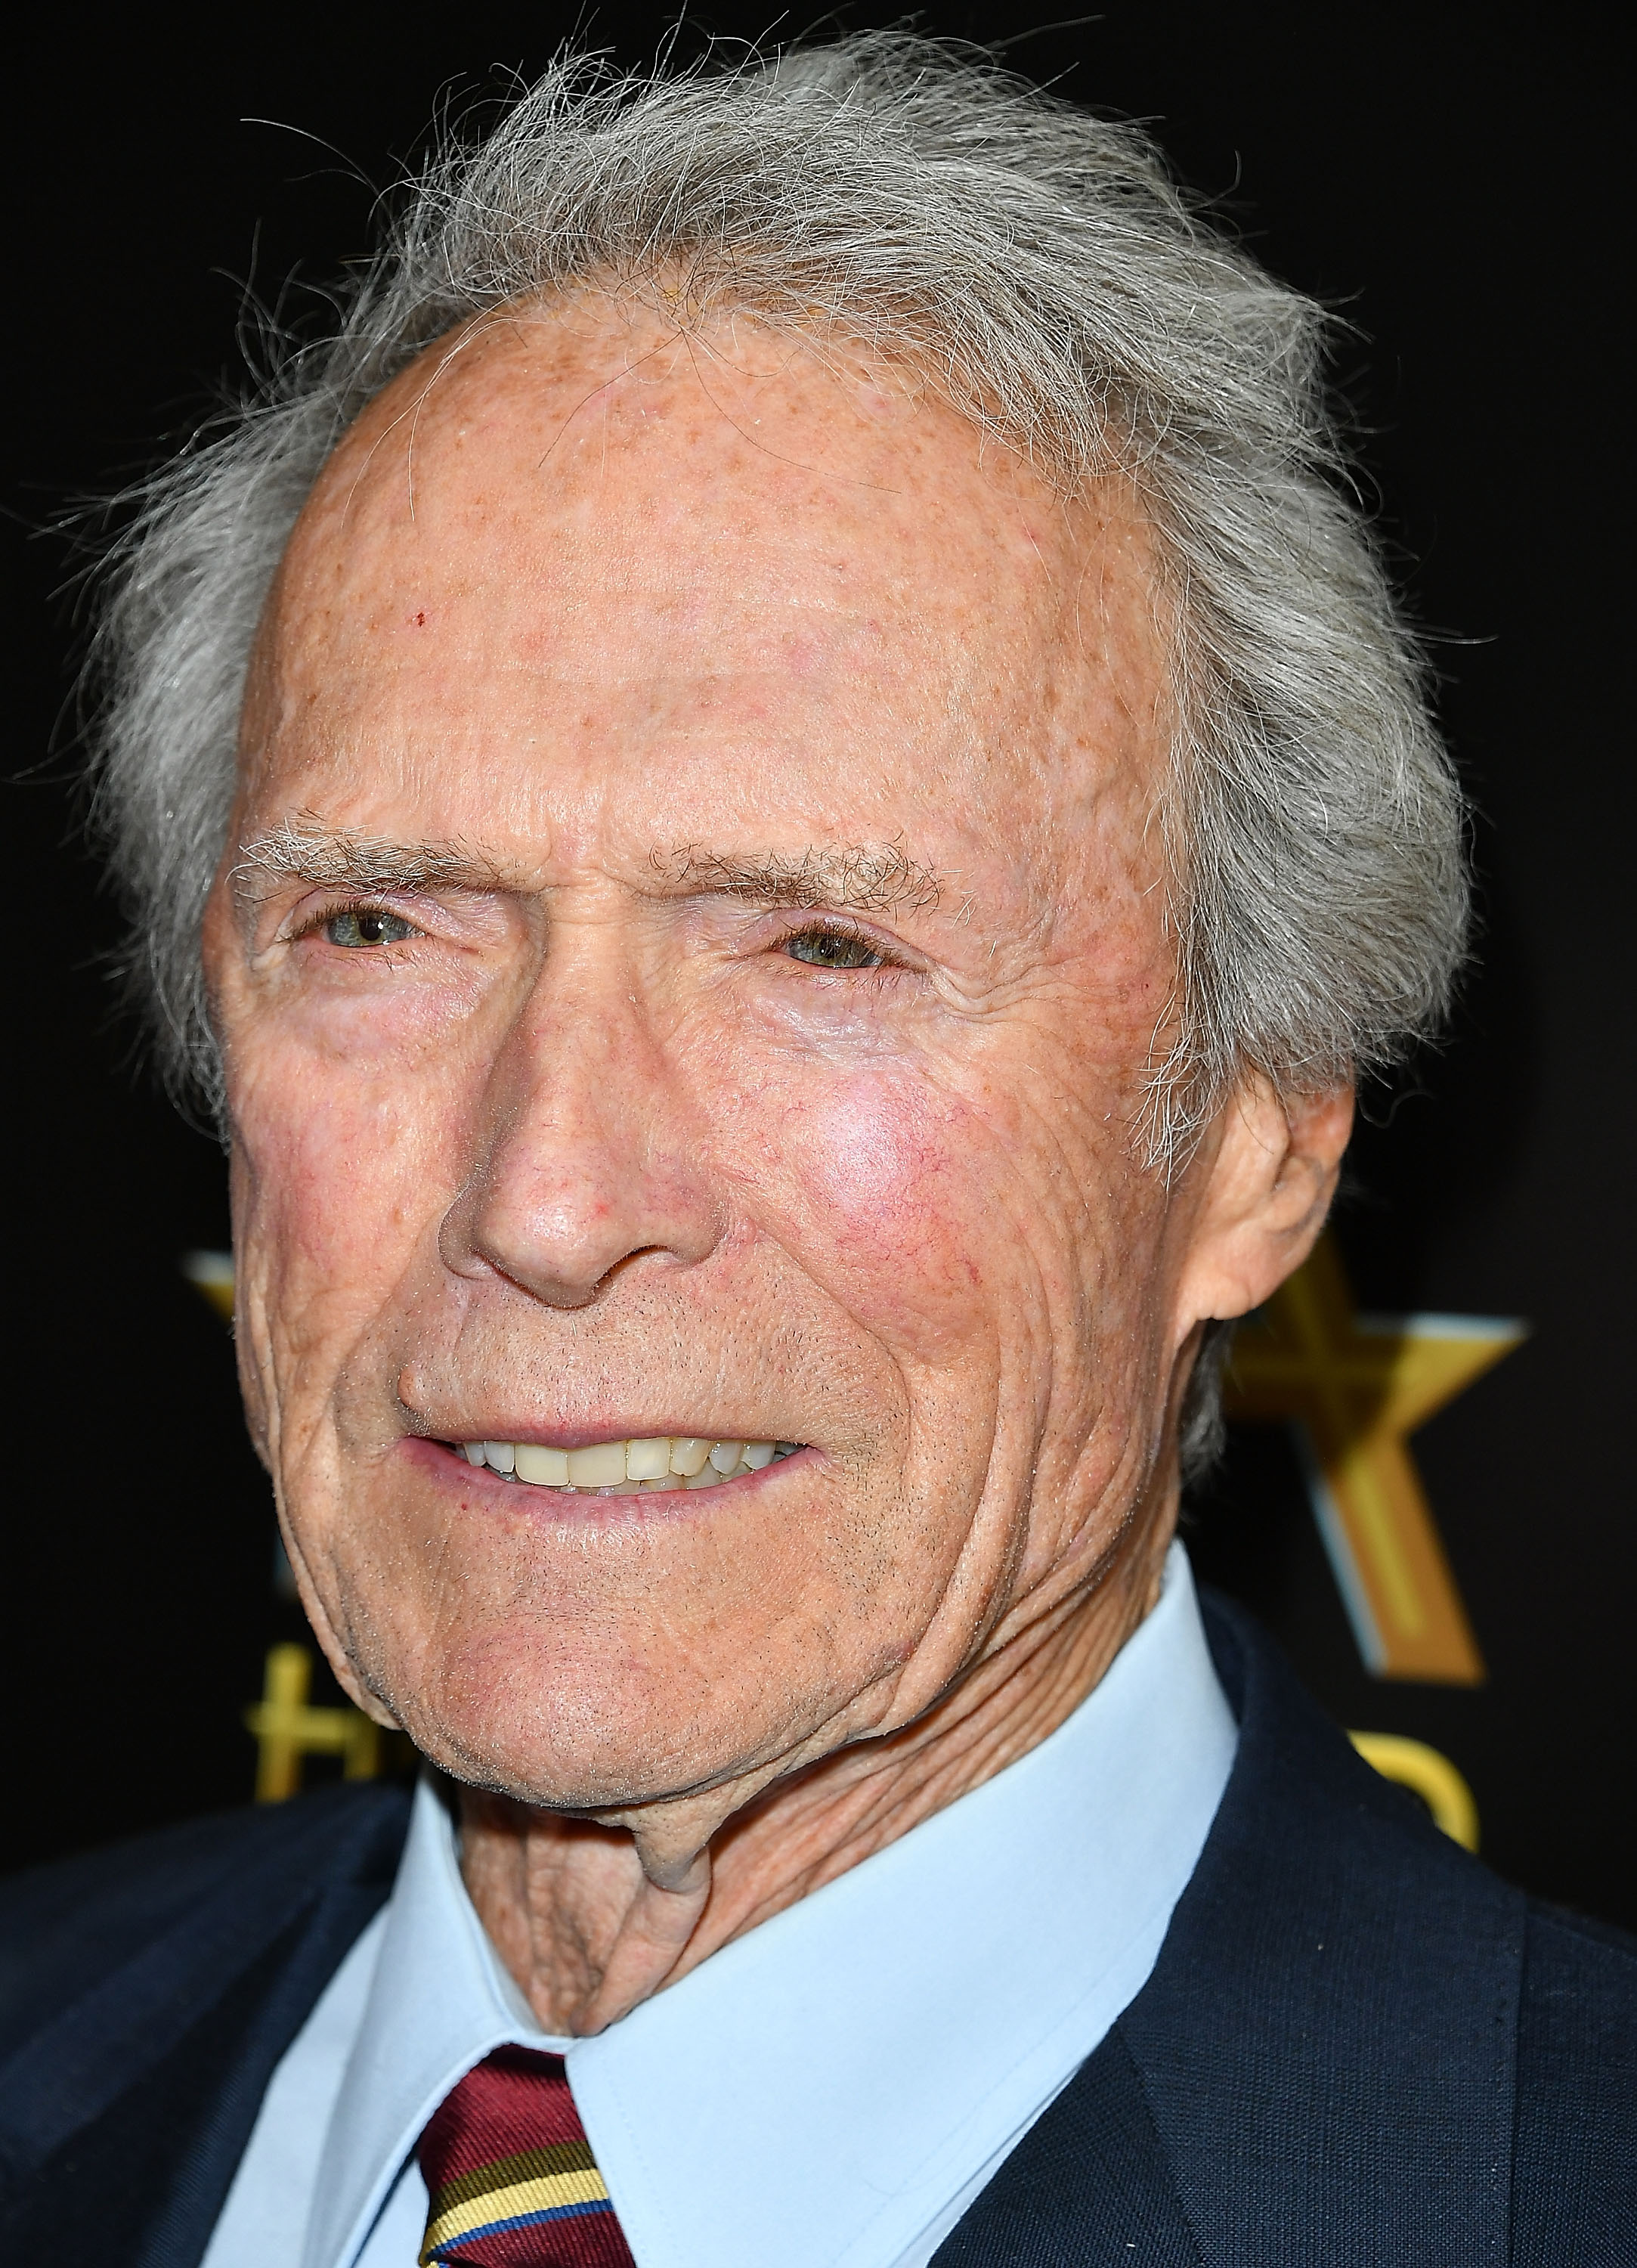 Clint Eastwood poses at the 20th Annual Hollywood Film Awards at The Beverly Hilton Hotel in Beverly Hills, California, on November 6, 2016. | Source: Getty Images